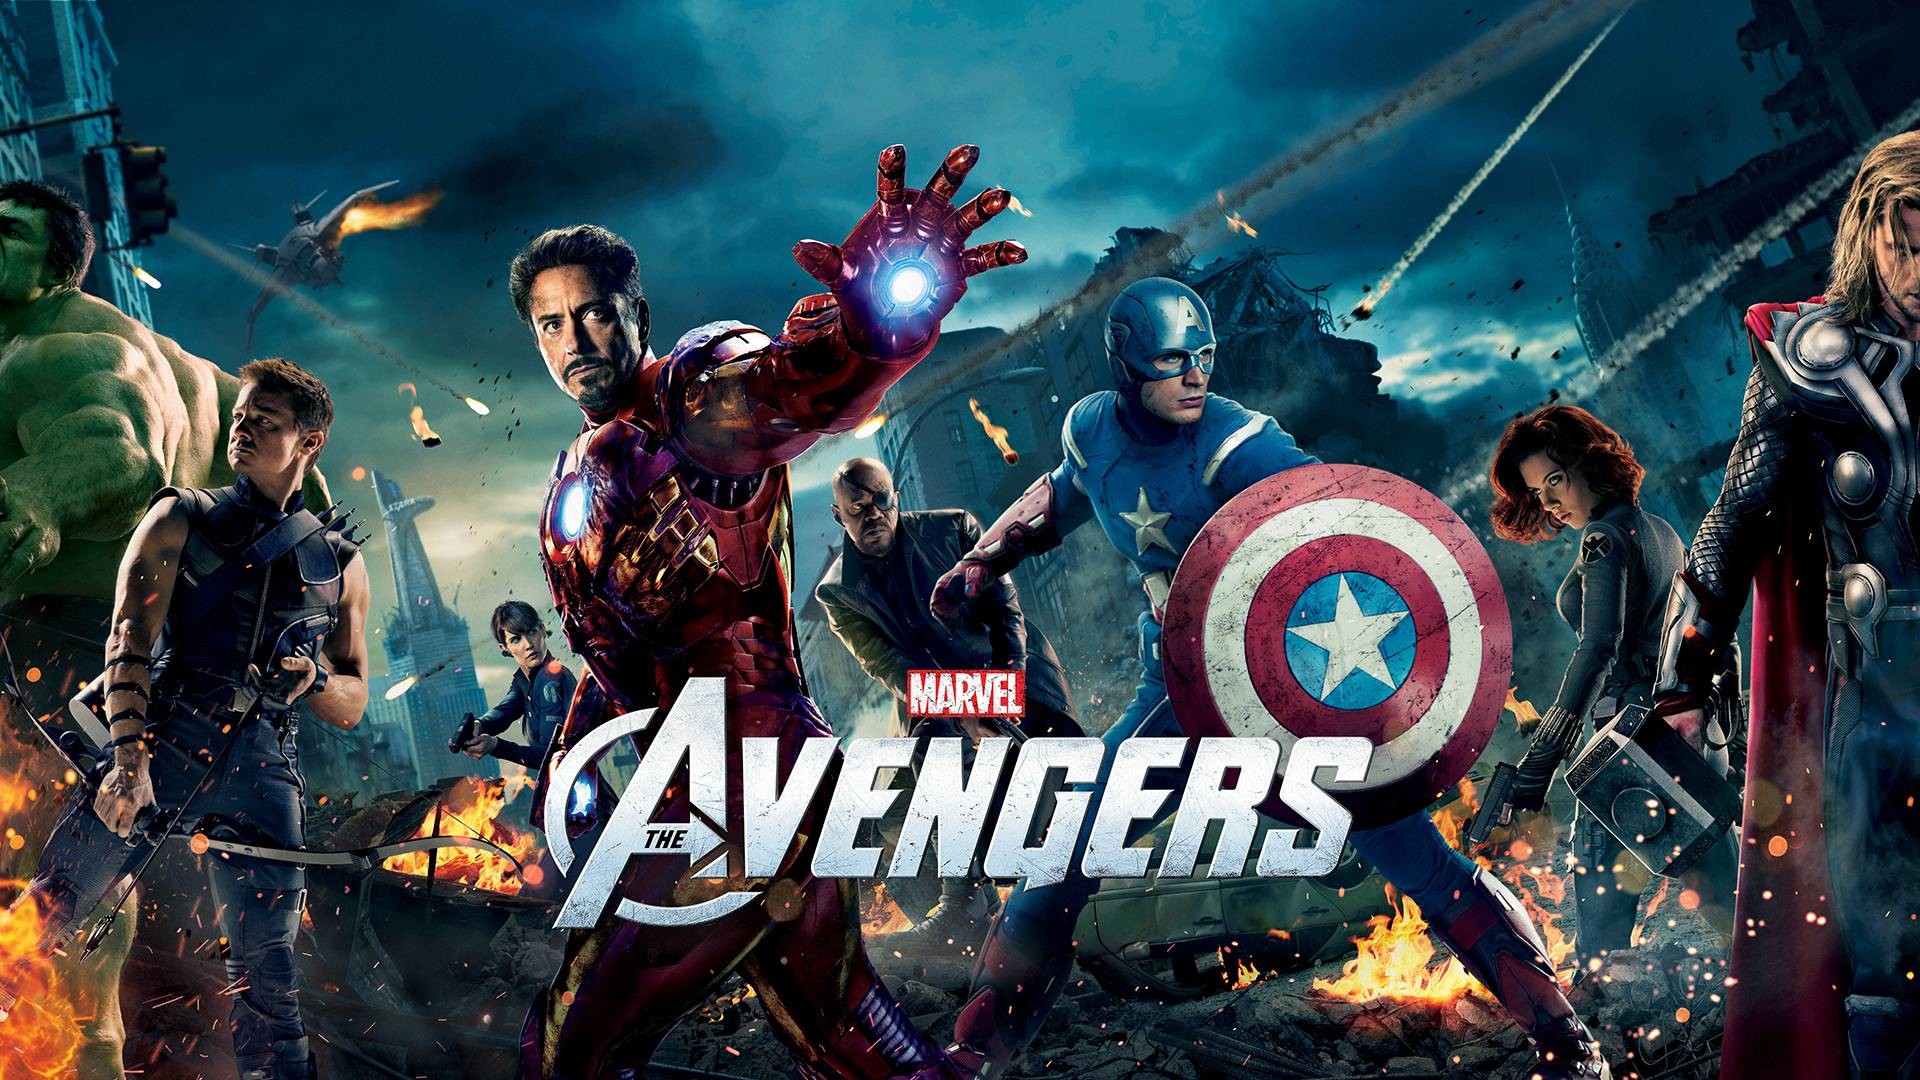 1920x1080 The Avengers HD Wallpaper Free Download | HD Free Wallpapers Download